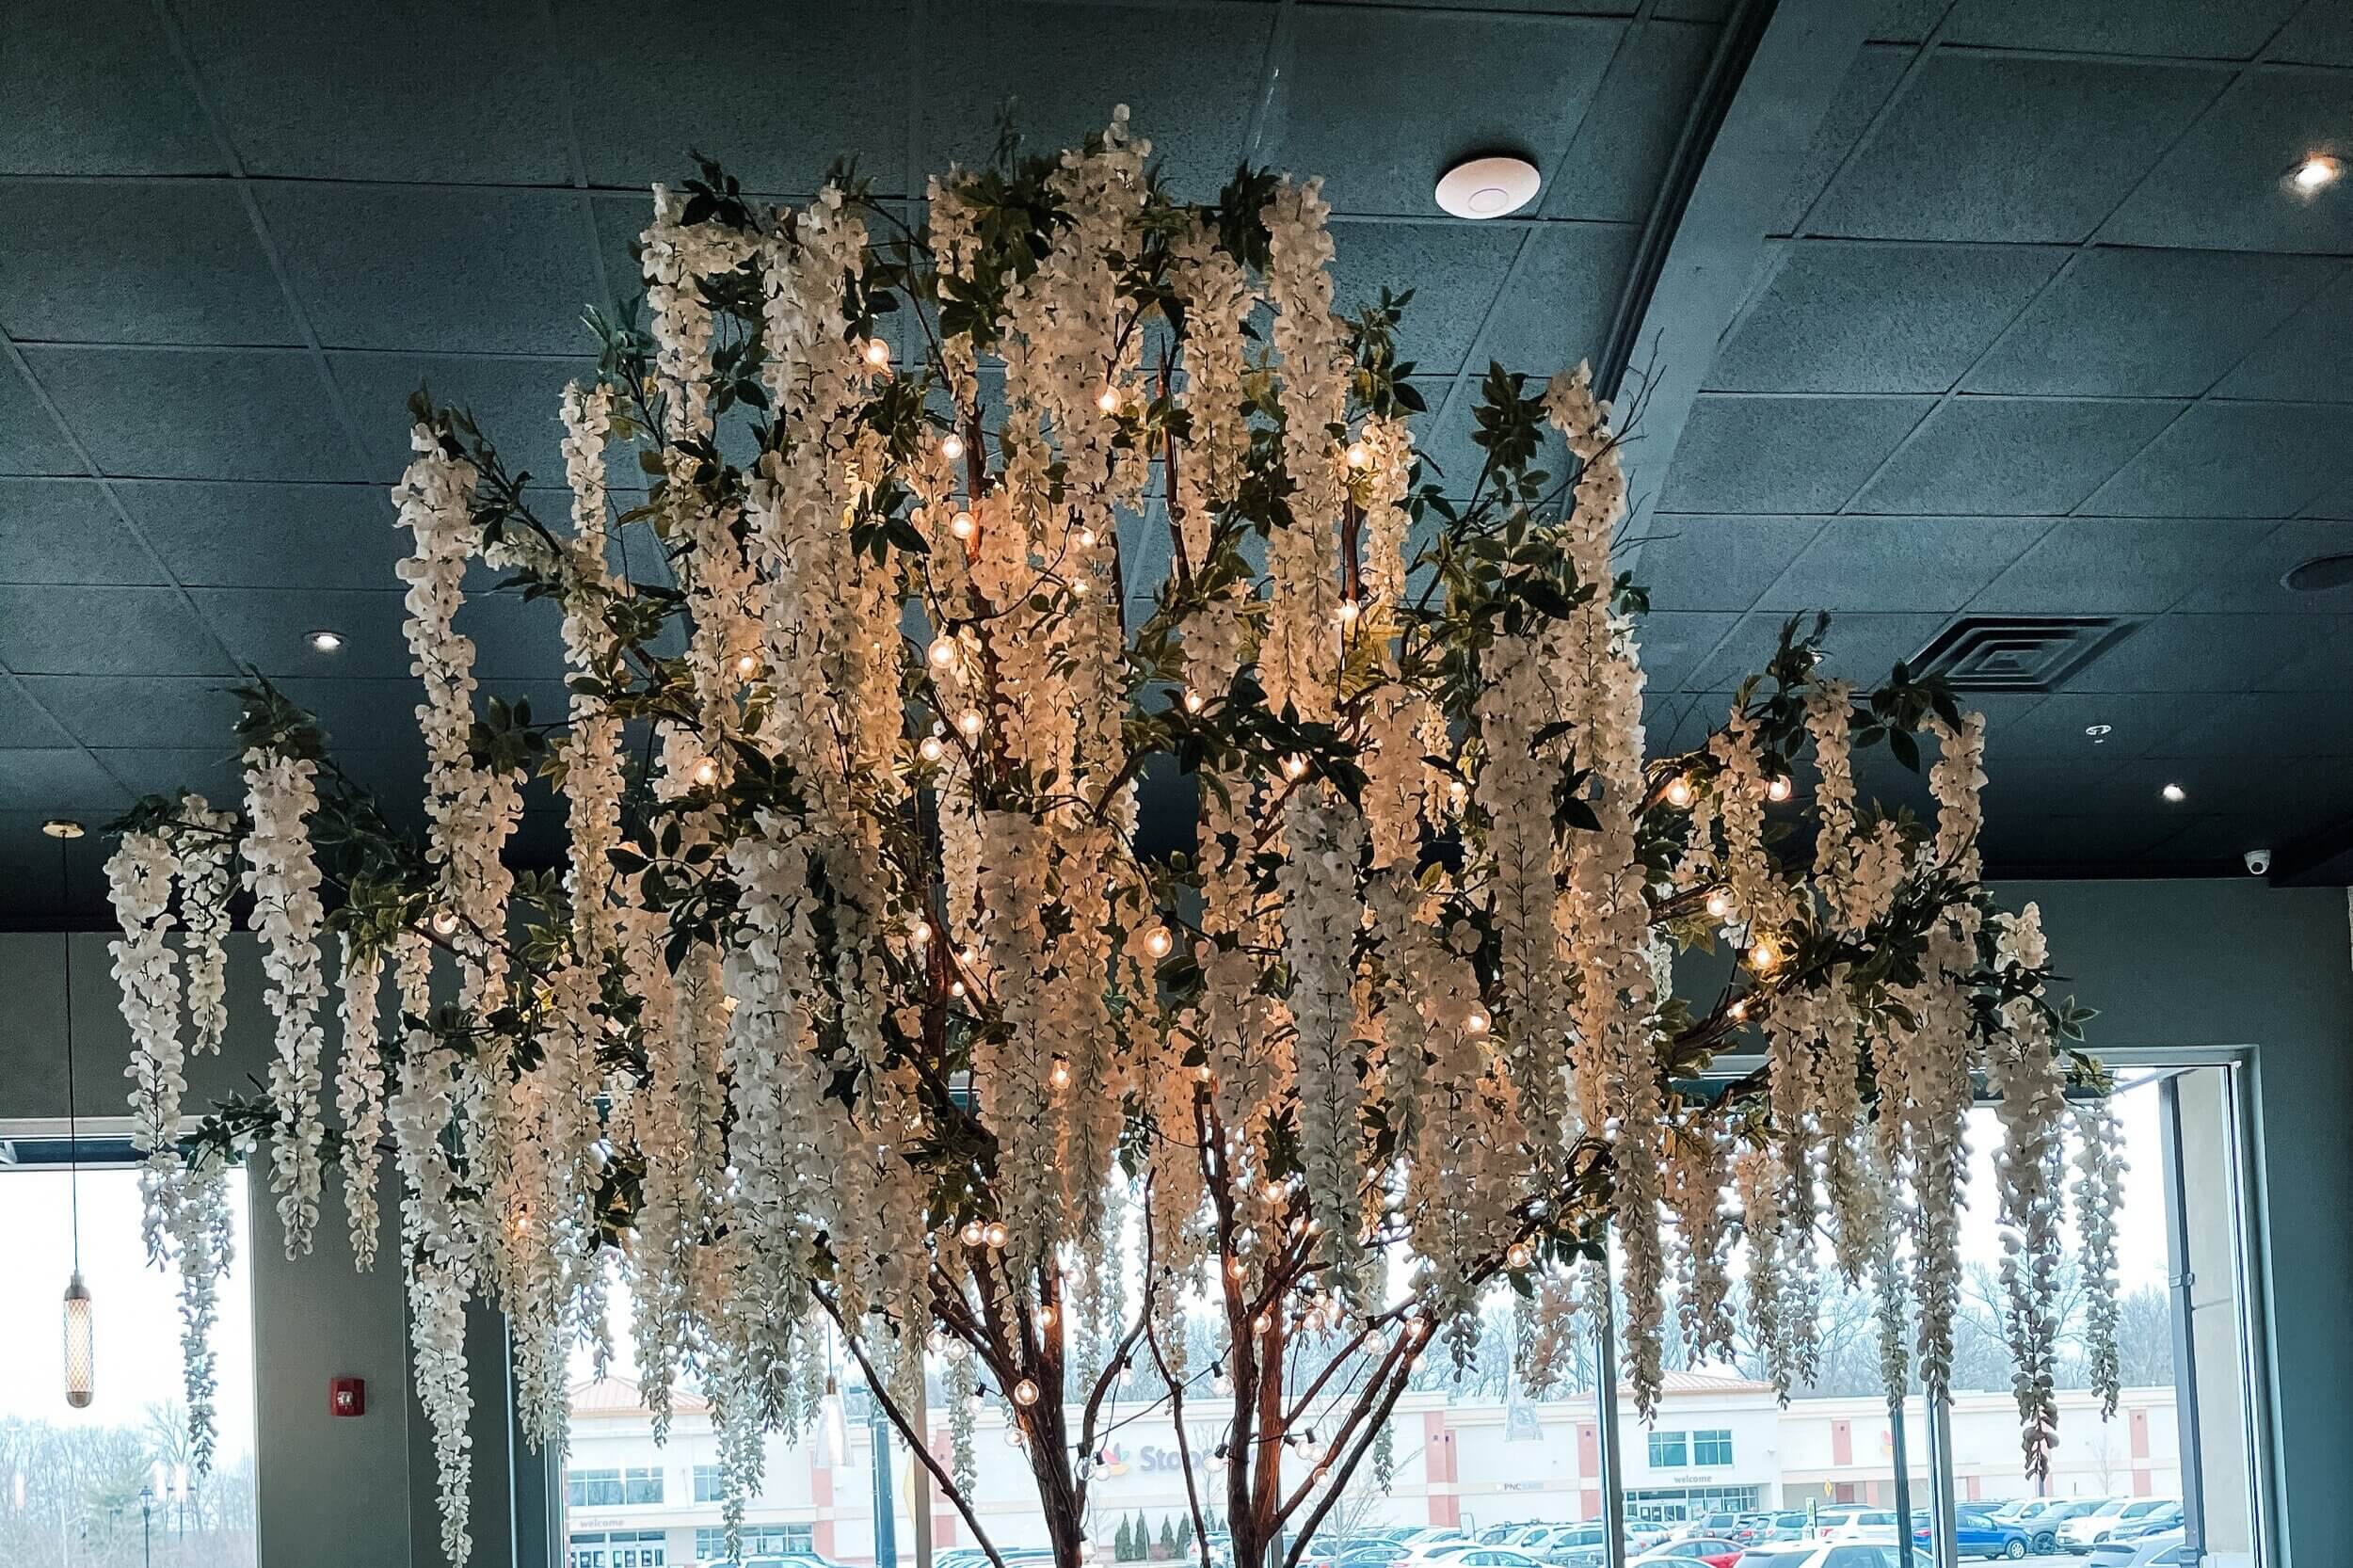 Artificial Wisteria Tree also provides accent lighting for New Jersey Restaurant